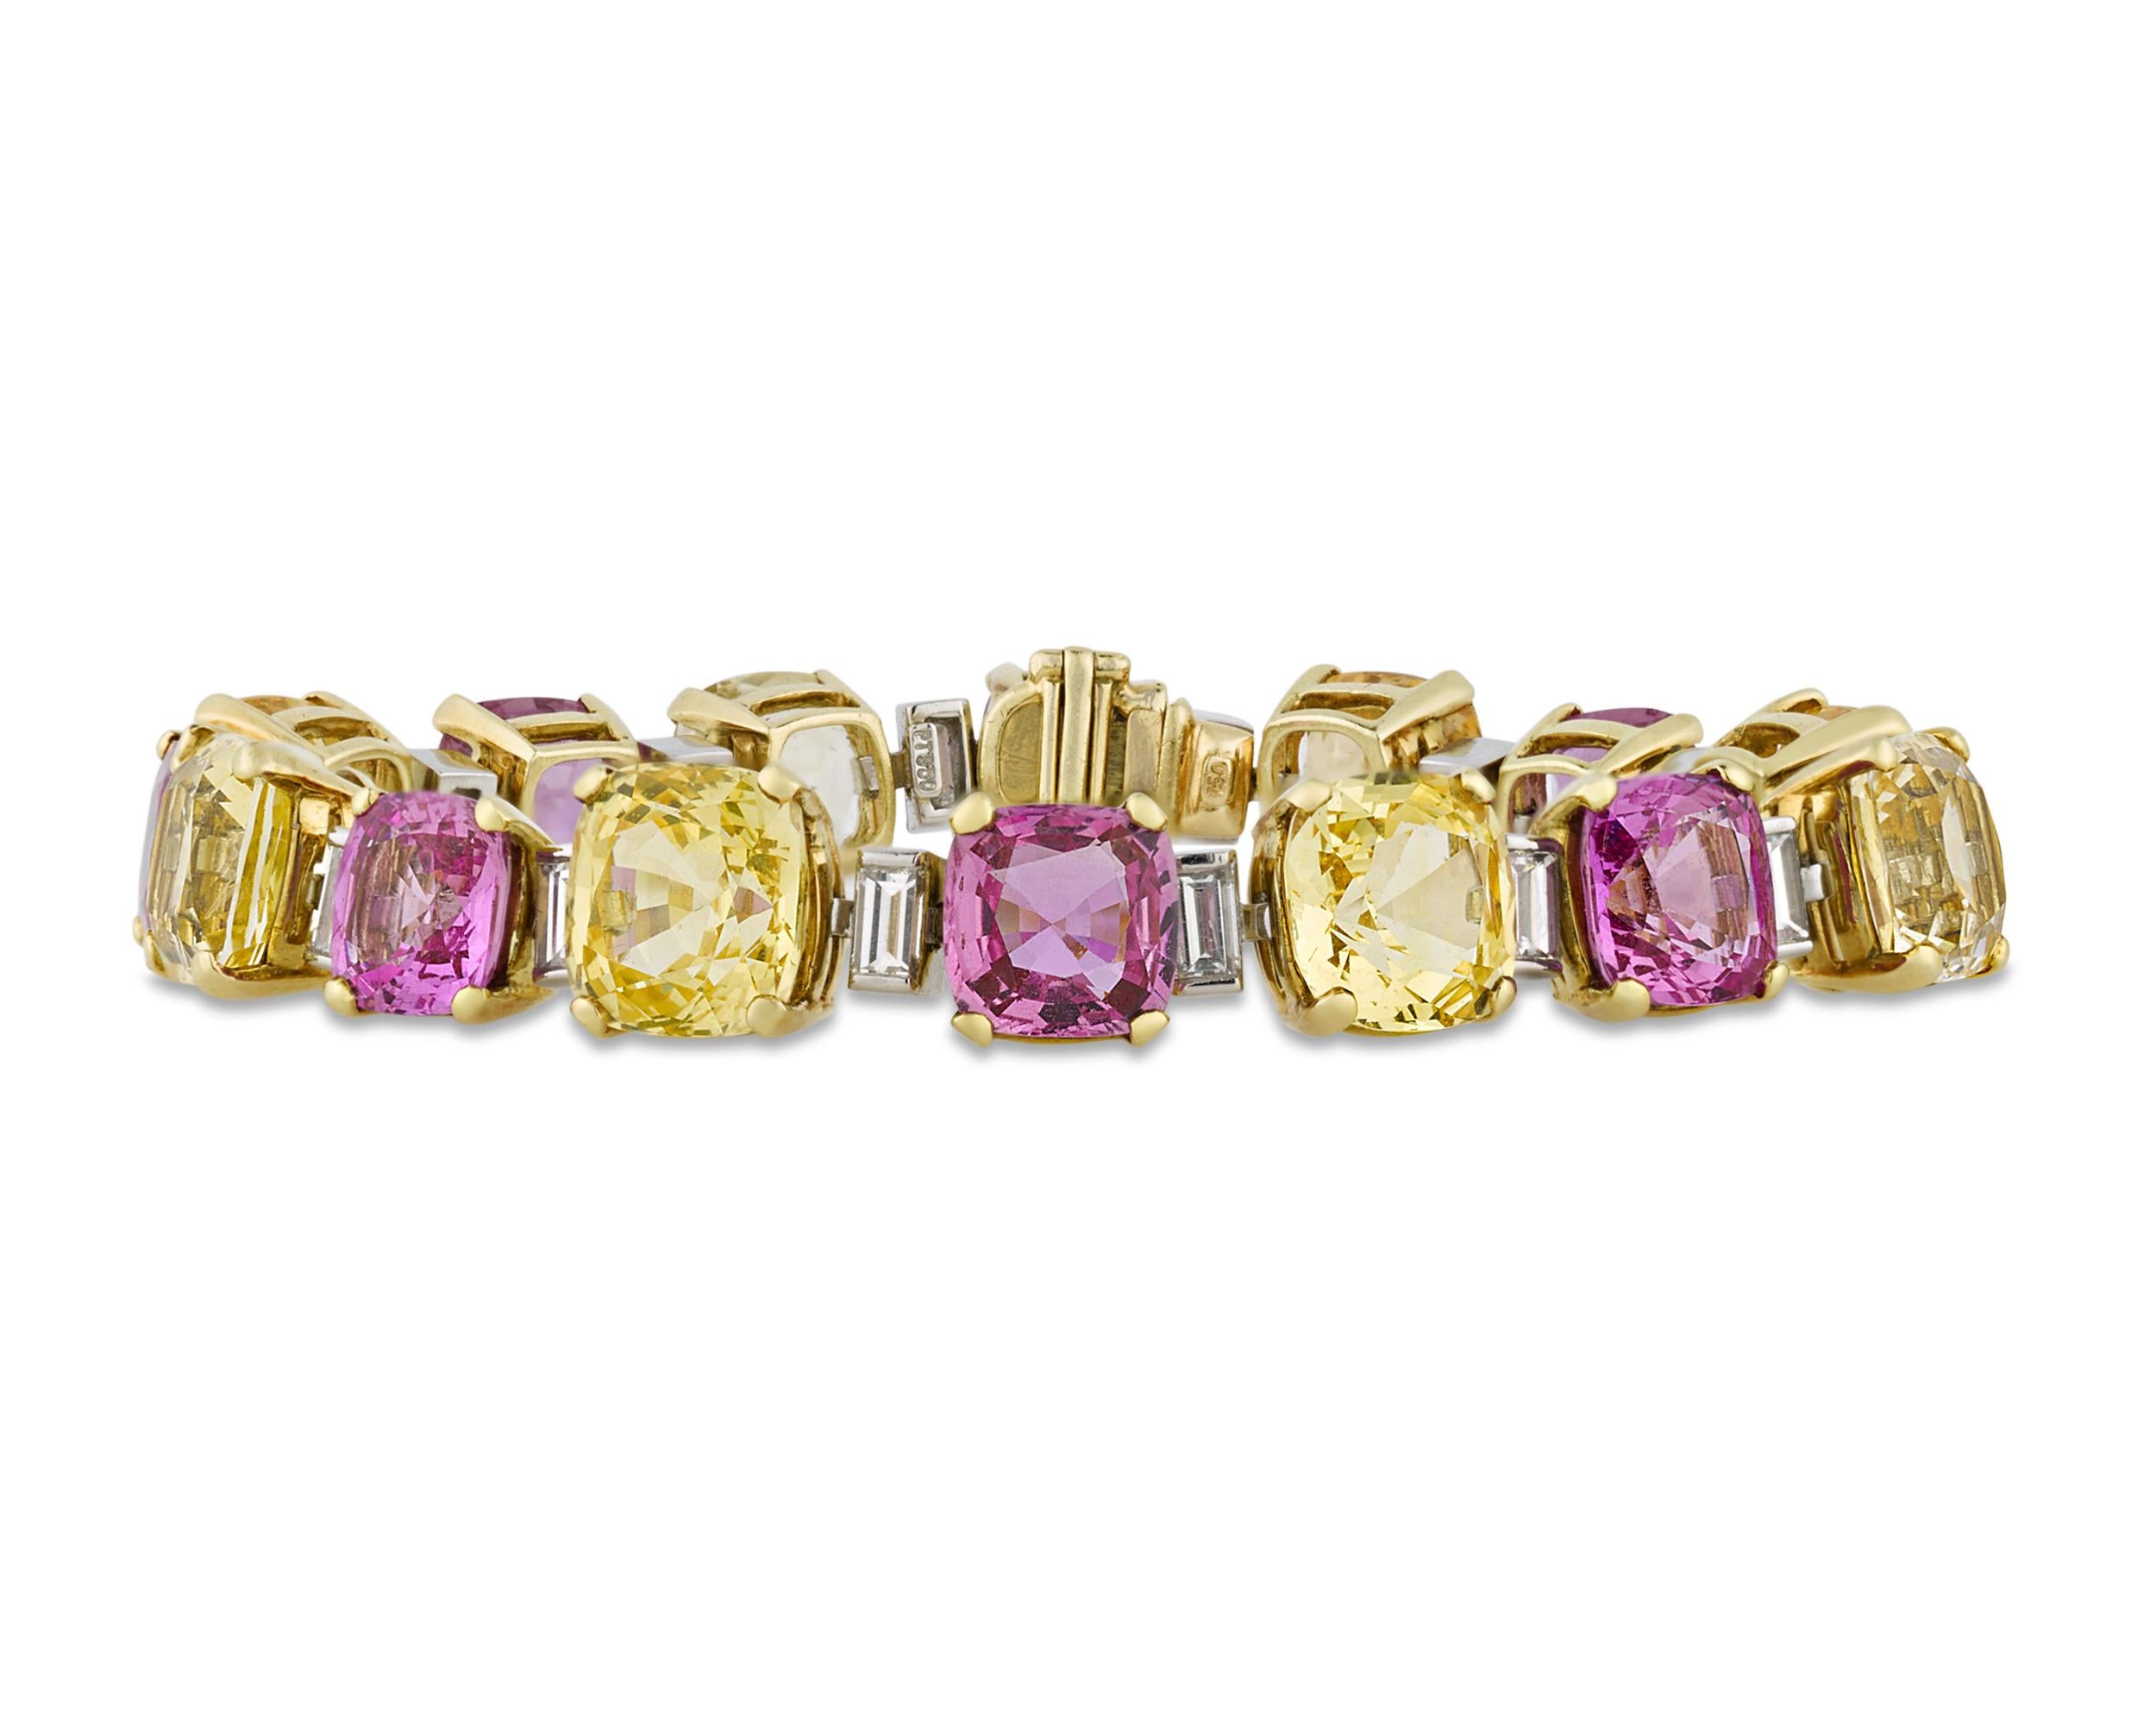 Showcasing approximately 46.00 carats of yellow sapphires and 26.00 carats of pink, the rare gems in this incredible bracelet display the vibrant and desirable hues for which precious colored sapphires are famous. Interspersed with baguette-cut